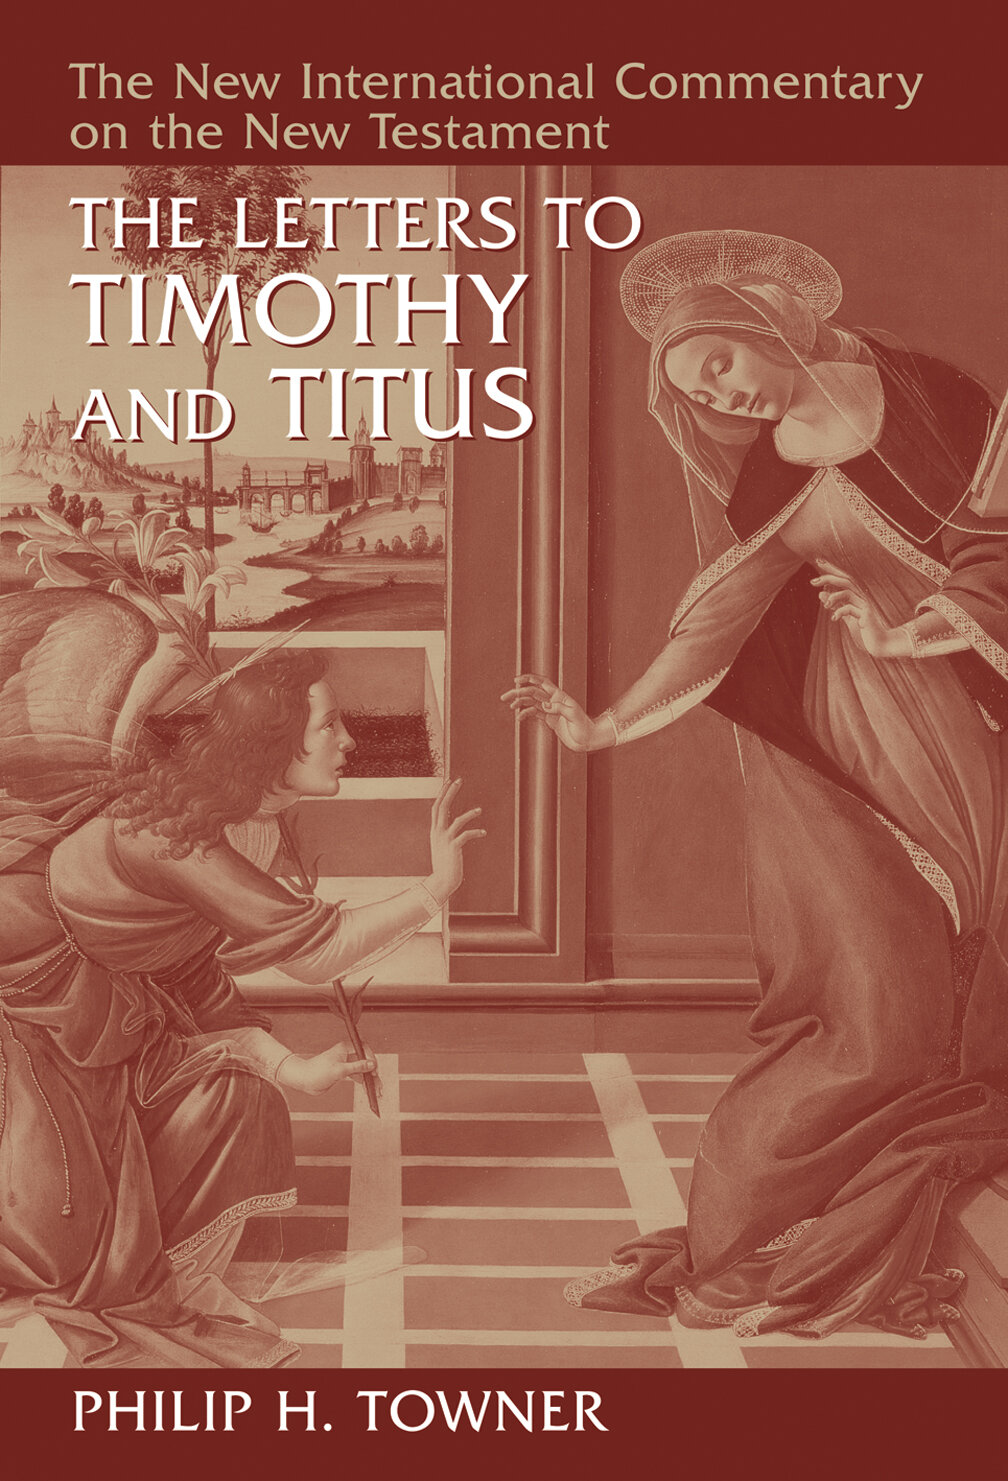 The Letters to Timothy and Titus (The New International Commentary on the New Testament | NICNT)